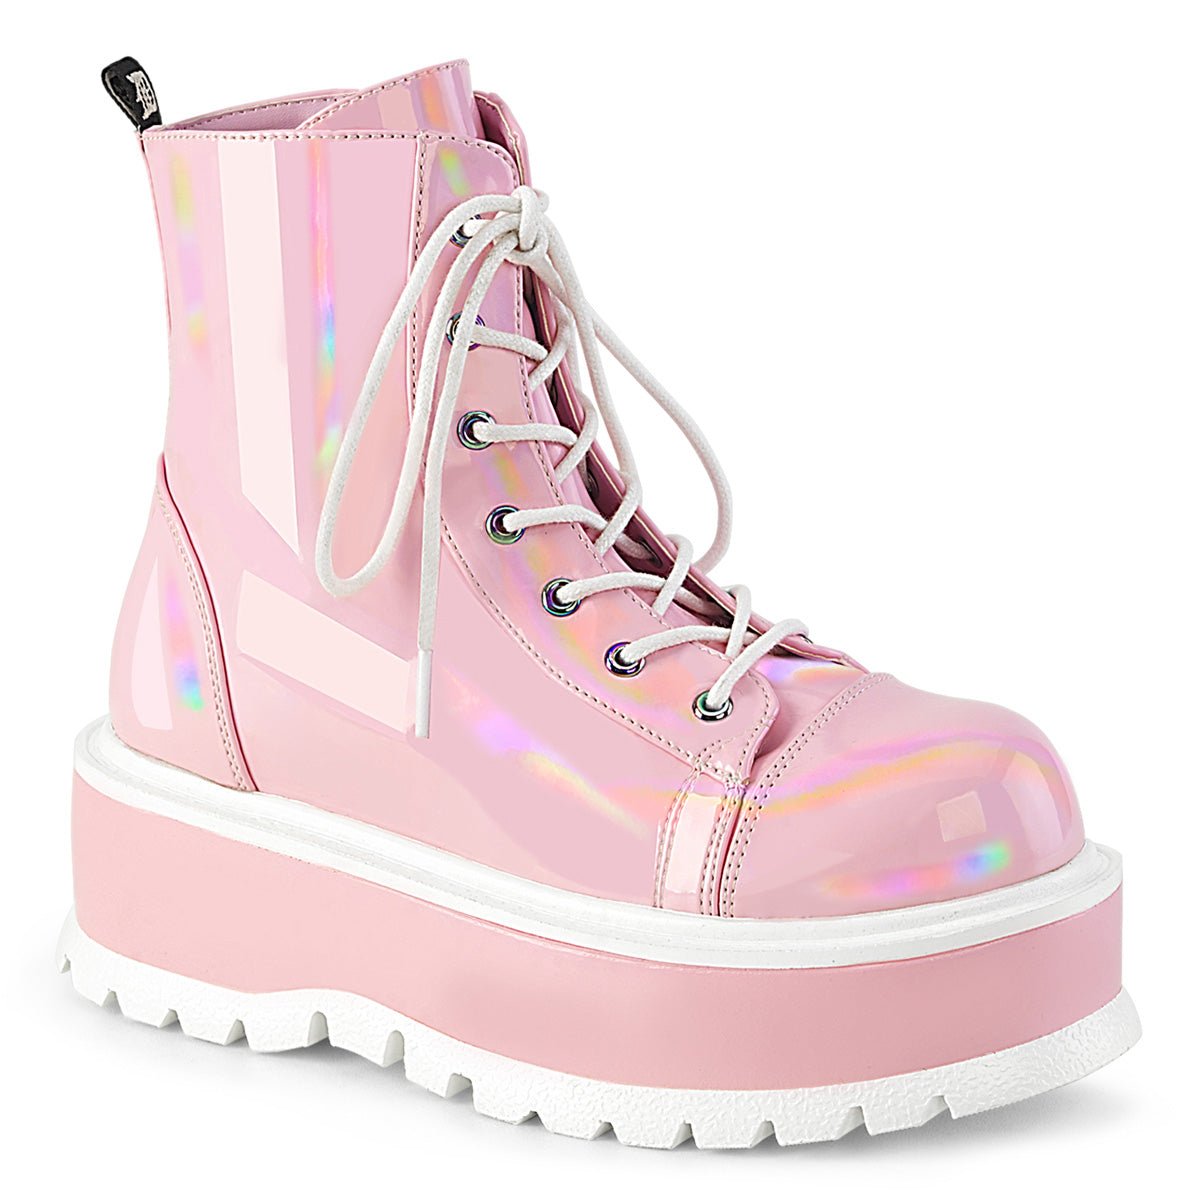 Too Fast | Demonia Slacker 55 | Baby Pink Hologram Patent Women's Ankle Boots